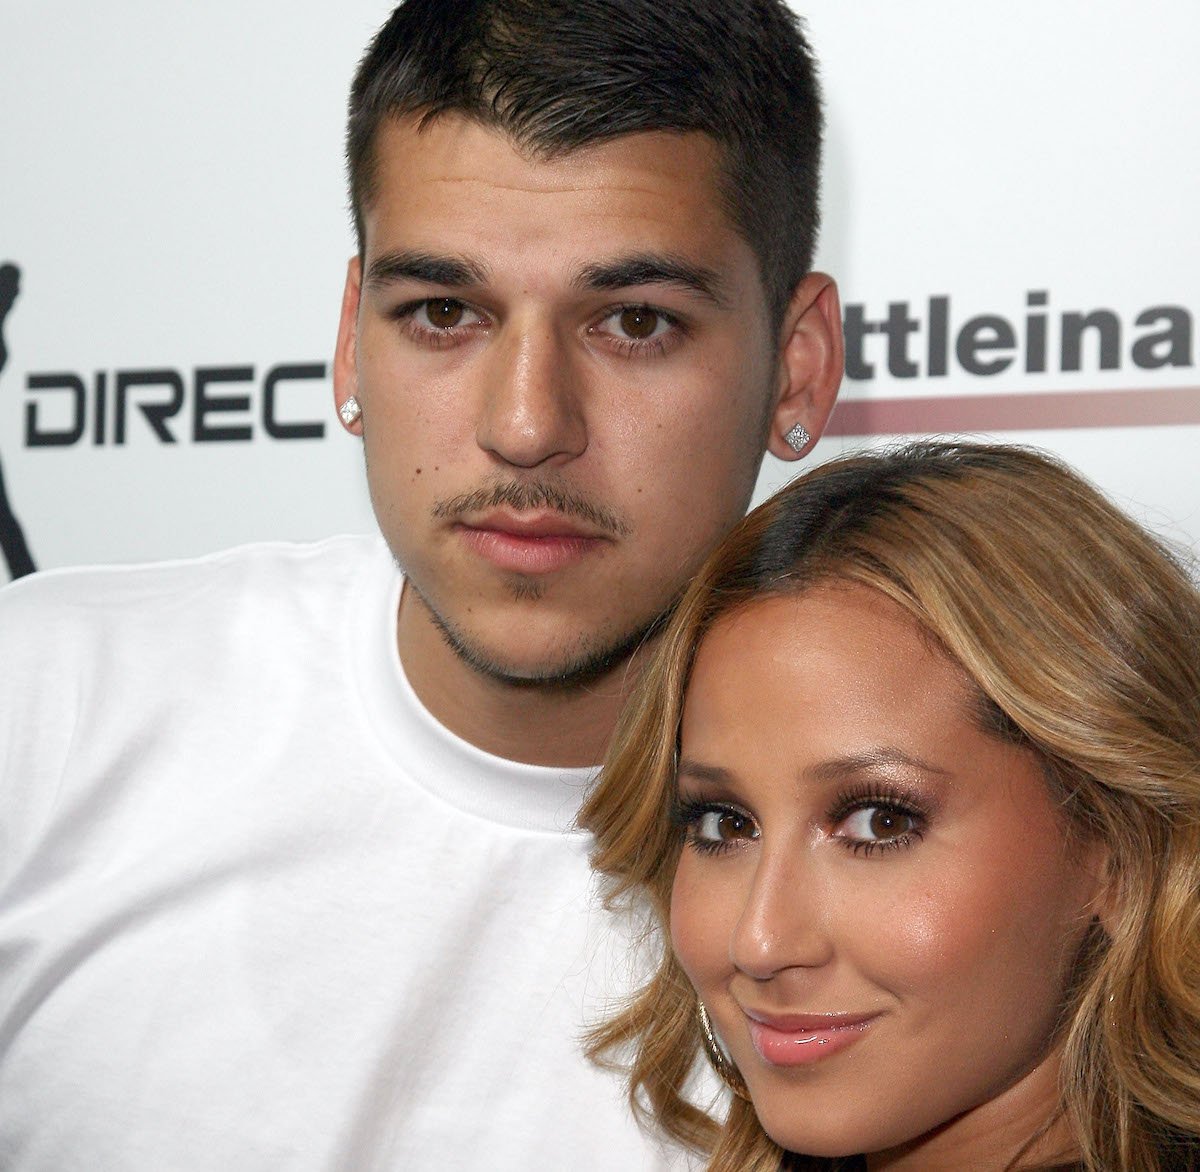 Rob Kardashian and Adrienne Bailon out together